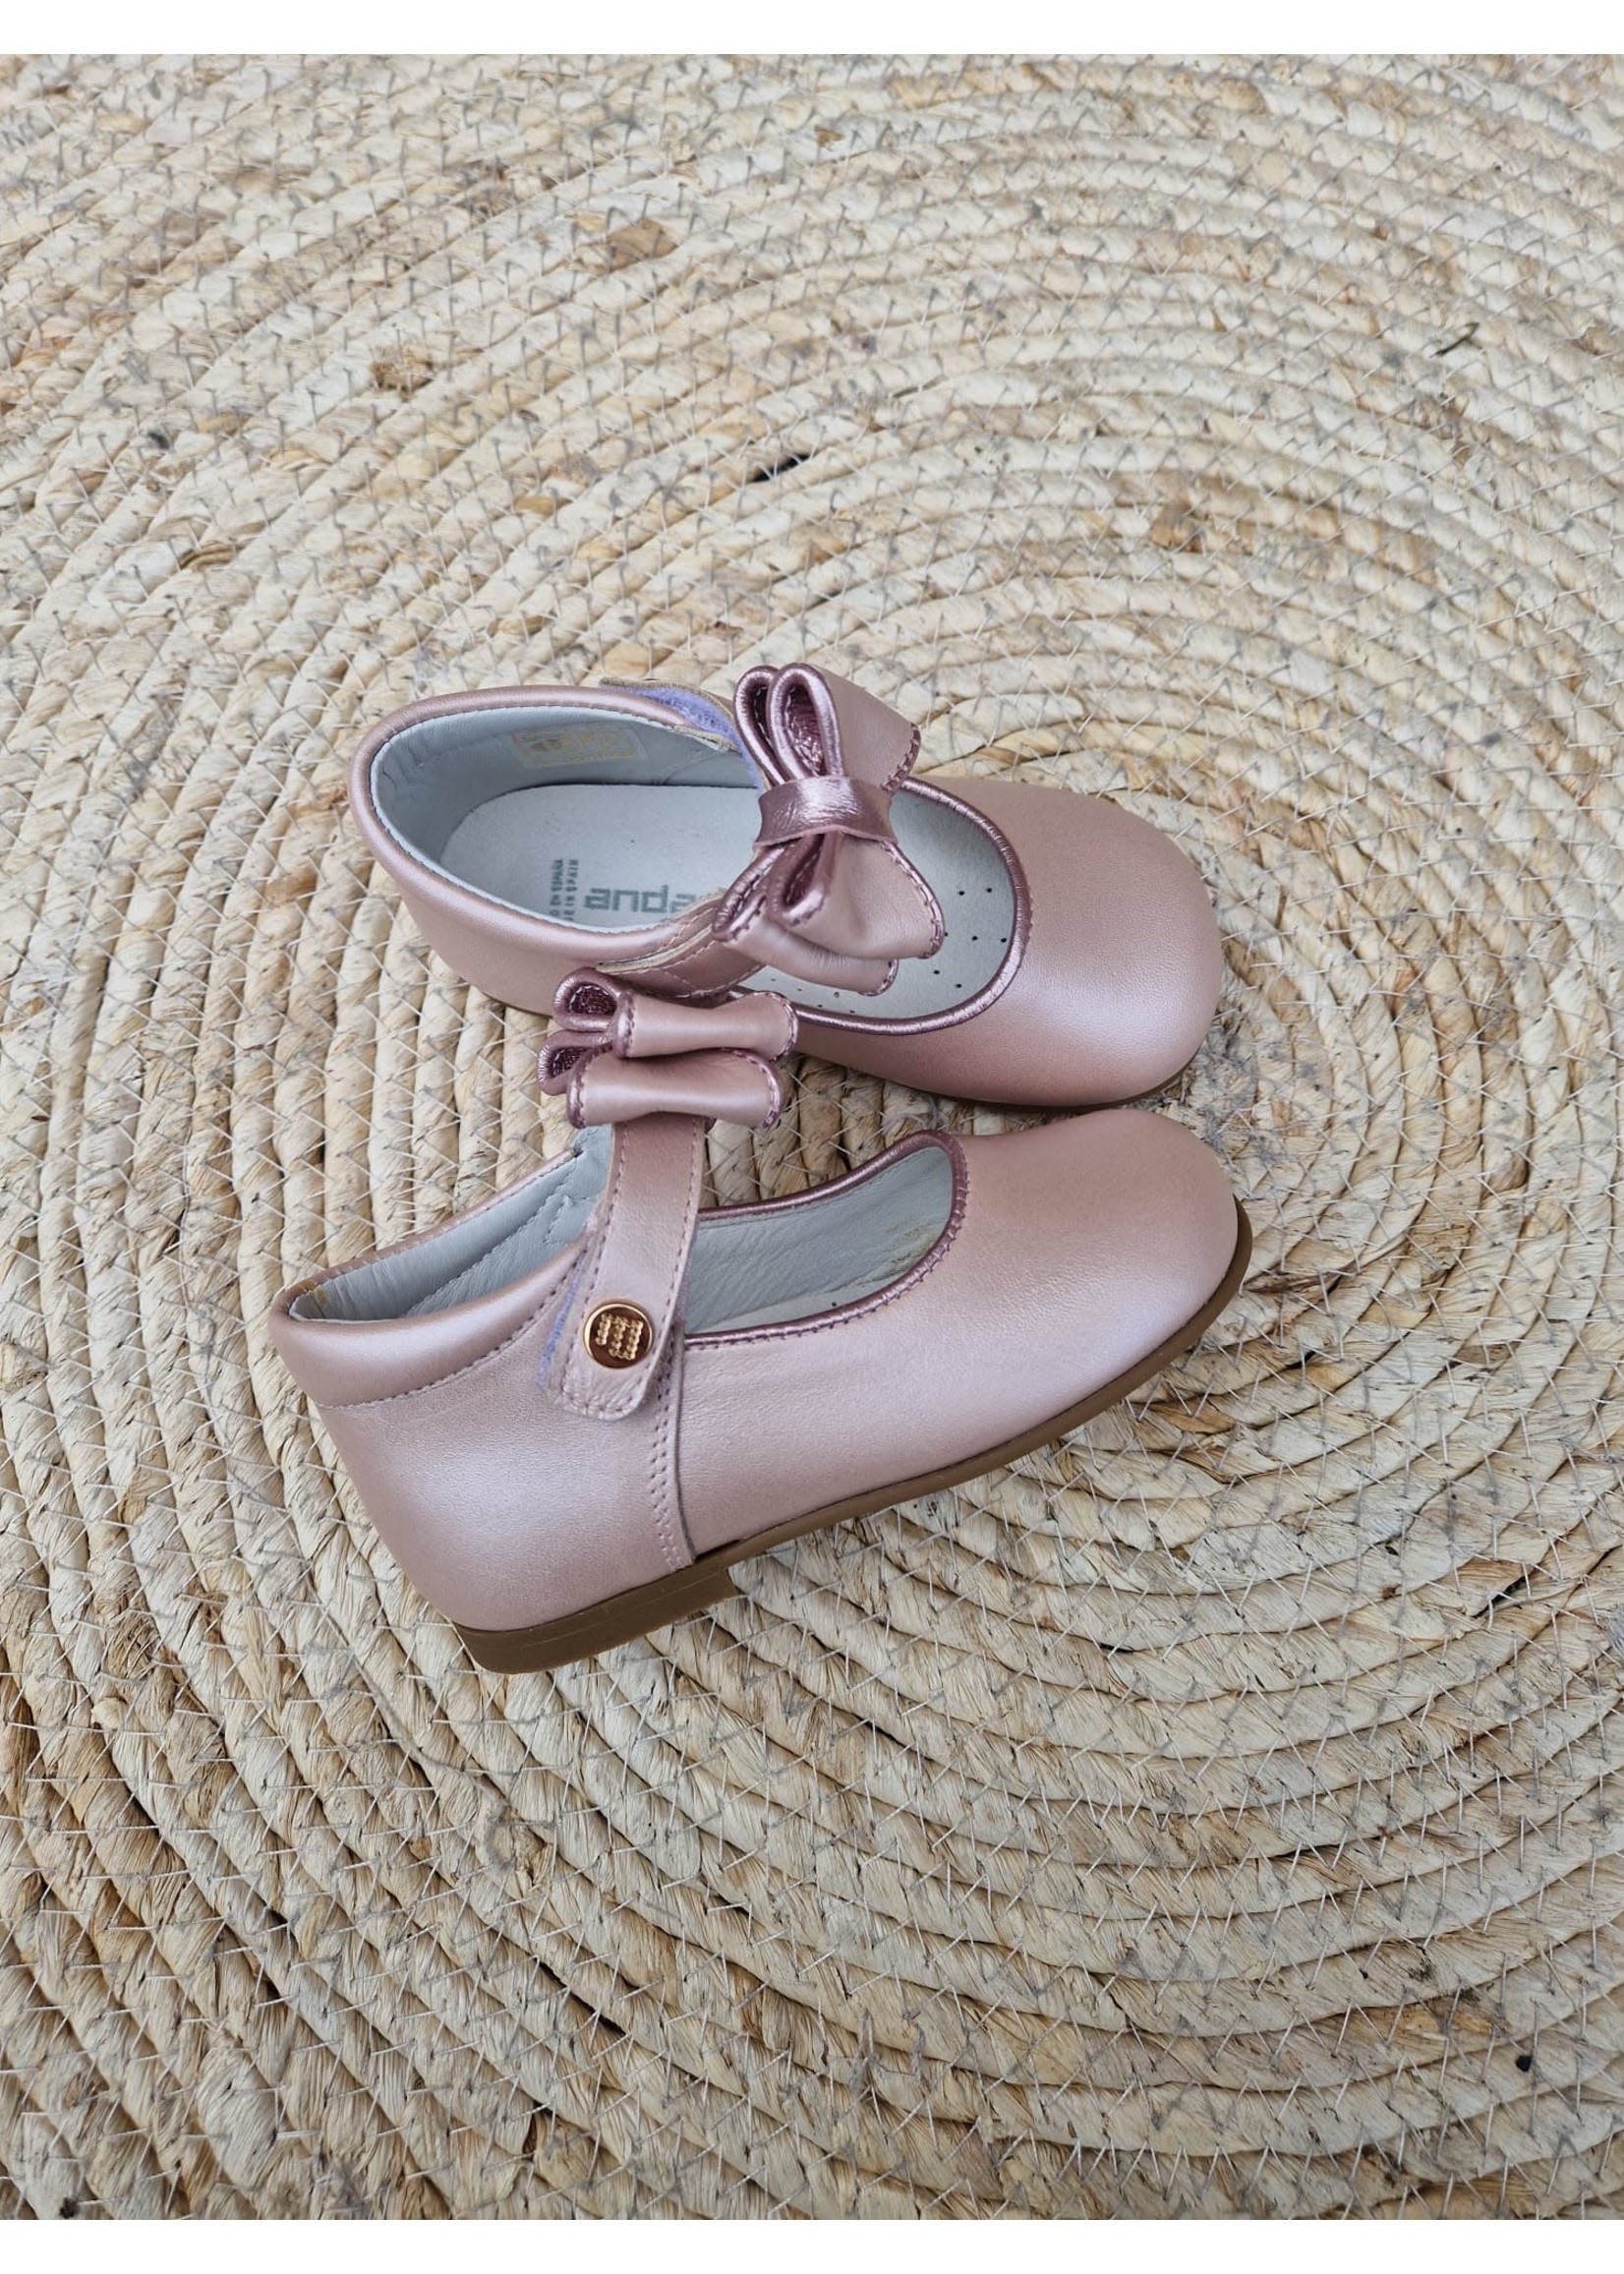 Andanines Nude Pink Shoes Bow - Andanines